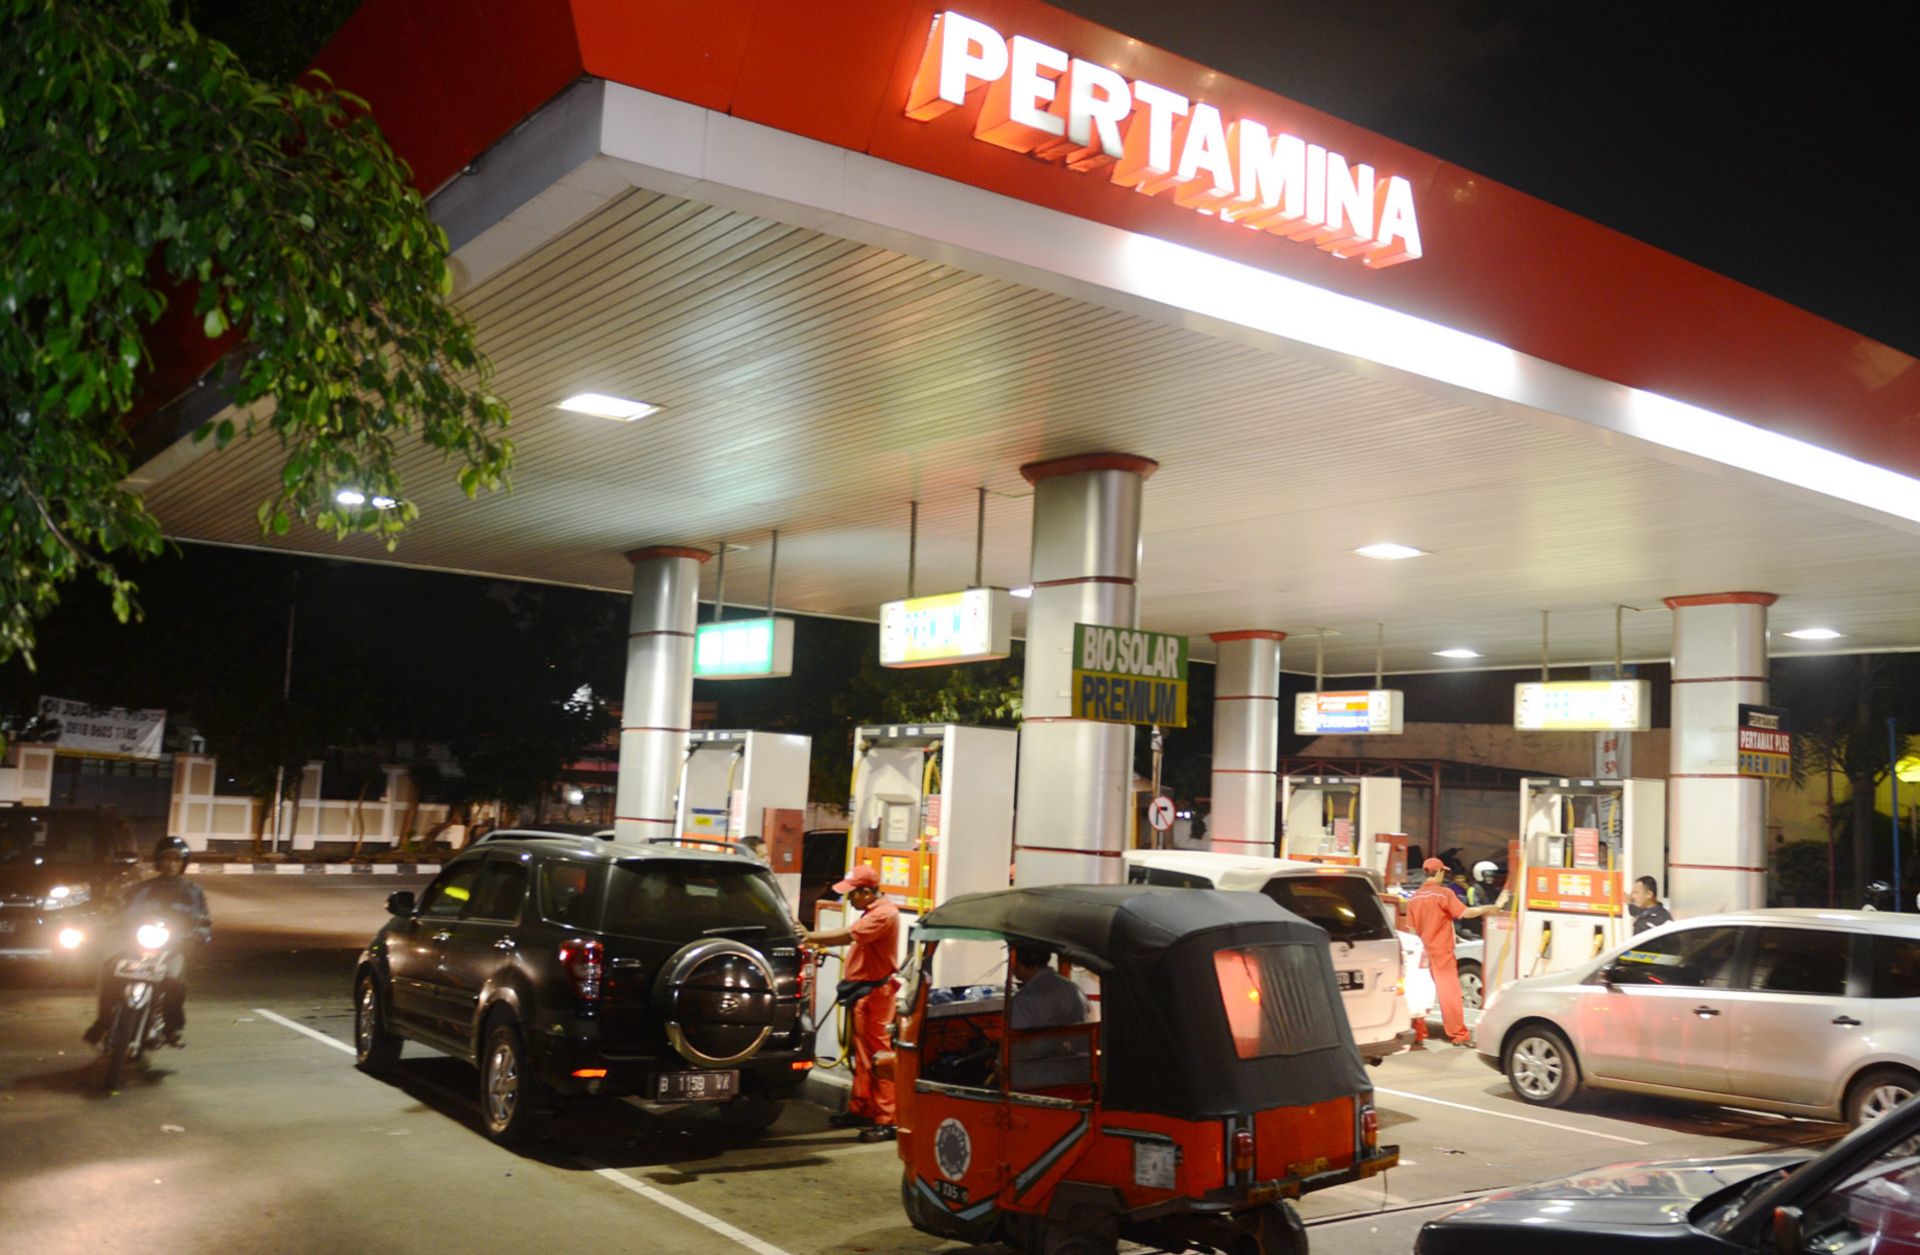 Indonesian motorists line up in at a Pertamina fuel station in Jakarta.